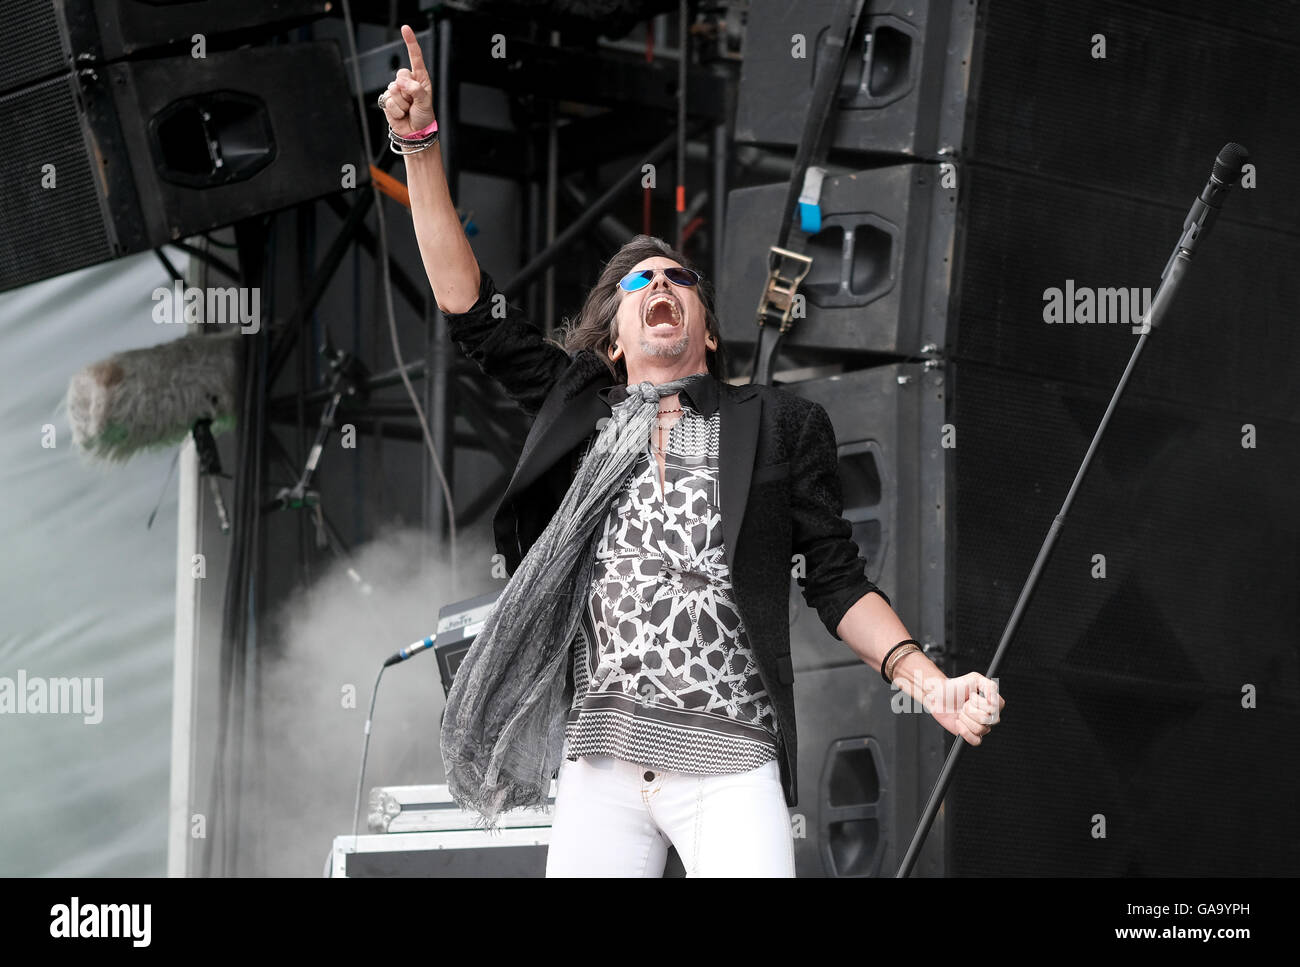 Wacken, Germany. 4th Aug, 2016. US Rock band Foreigner with singer Kelly Hansen performing at the Wacken Open Air festival in Wacken, Germany, 4 August 2016. 75,000 fans celebrate the (according to the organisers) worldwide biggest Heavy Metal festival. PHOTO: AXEL HEIMKEN/dpa/Alamy Live News Stock Photo